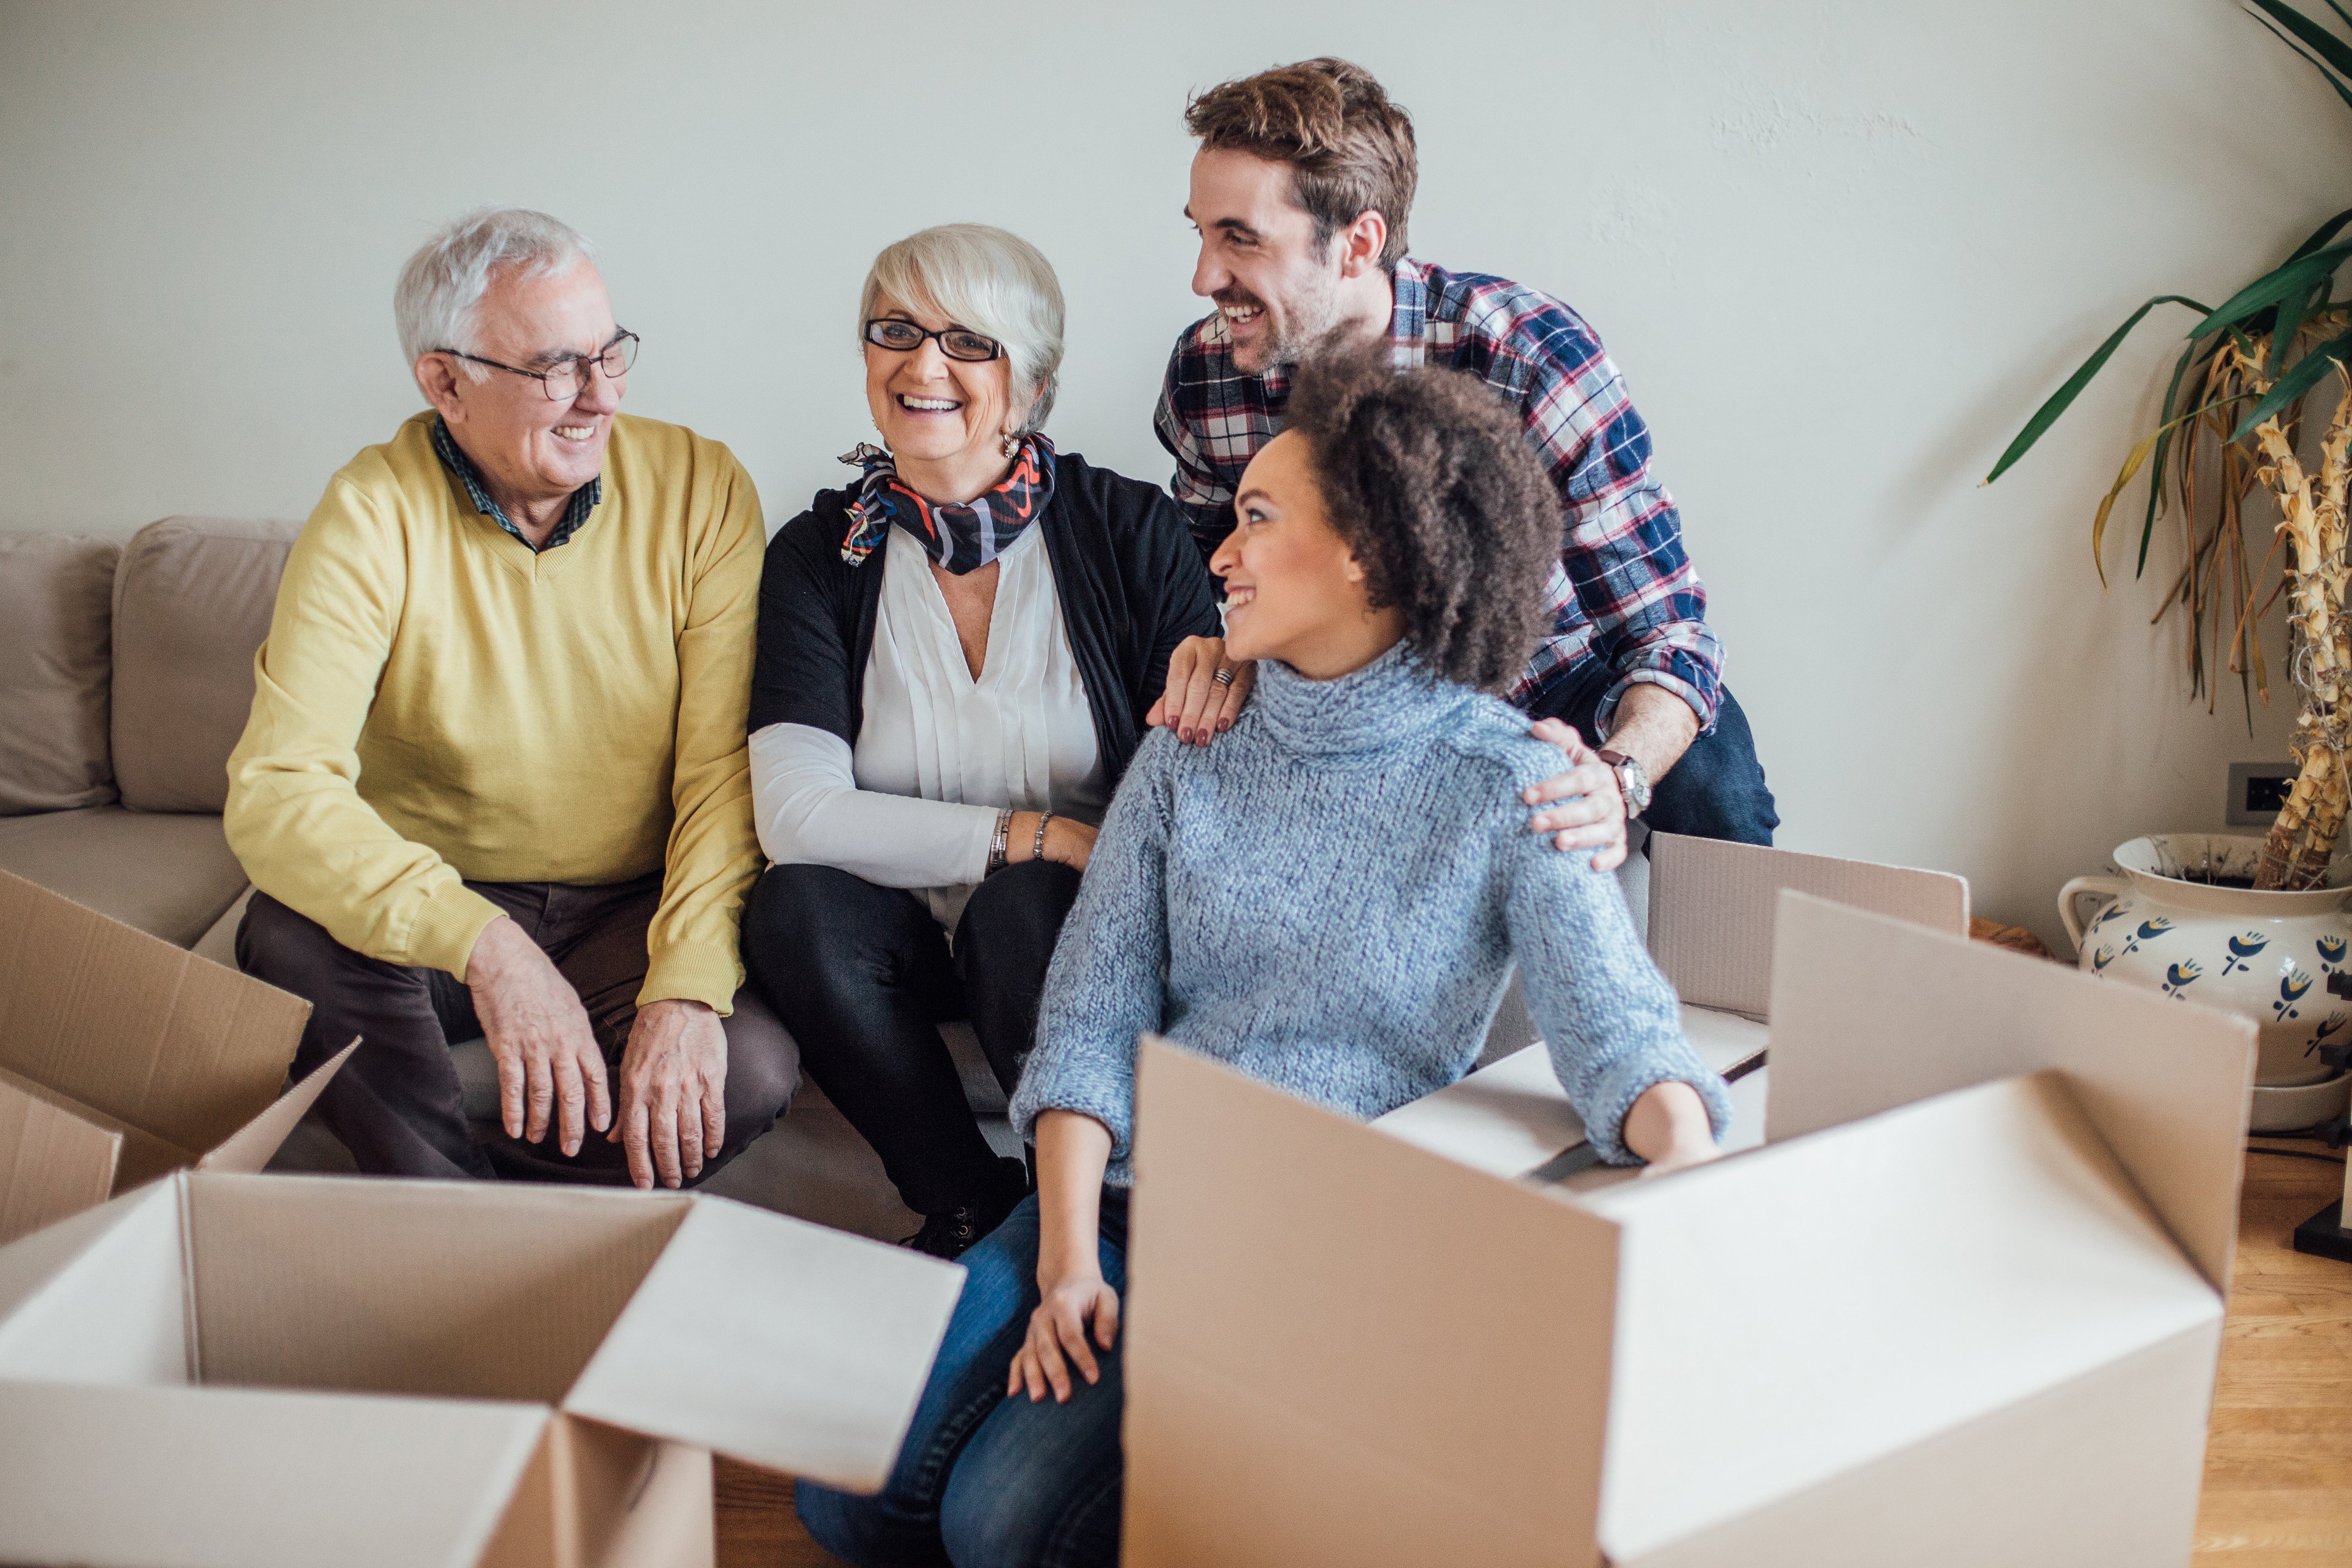 Family packing boxes together while laughing with one another